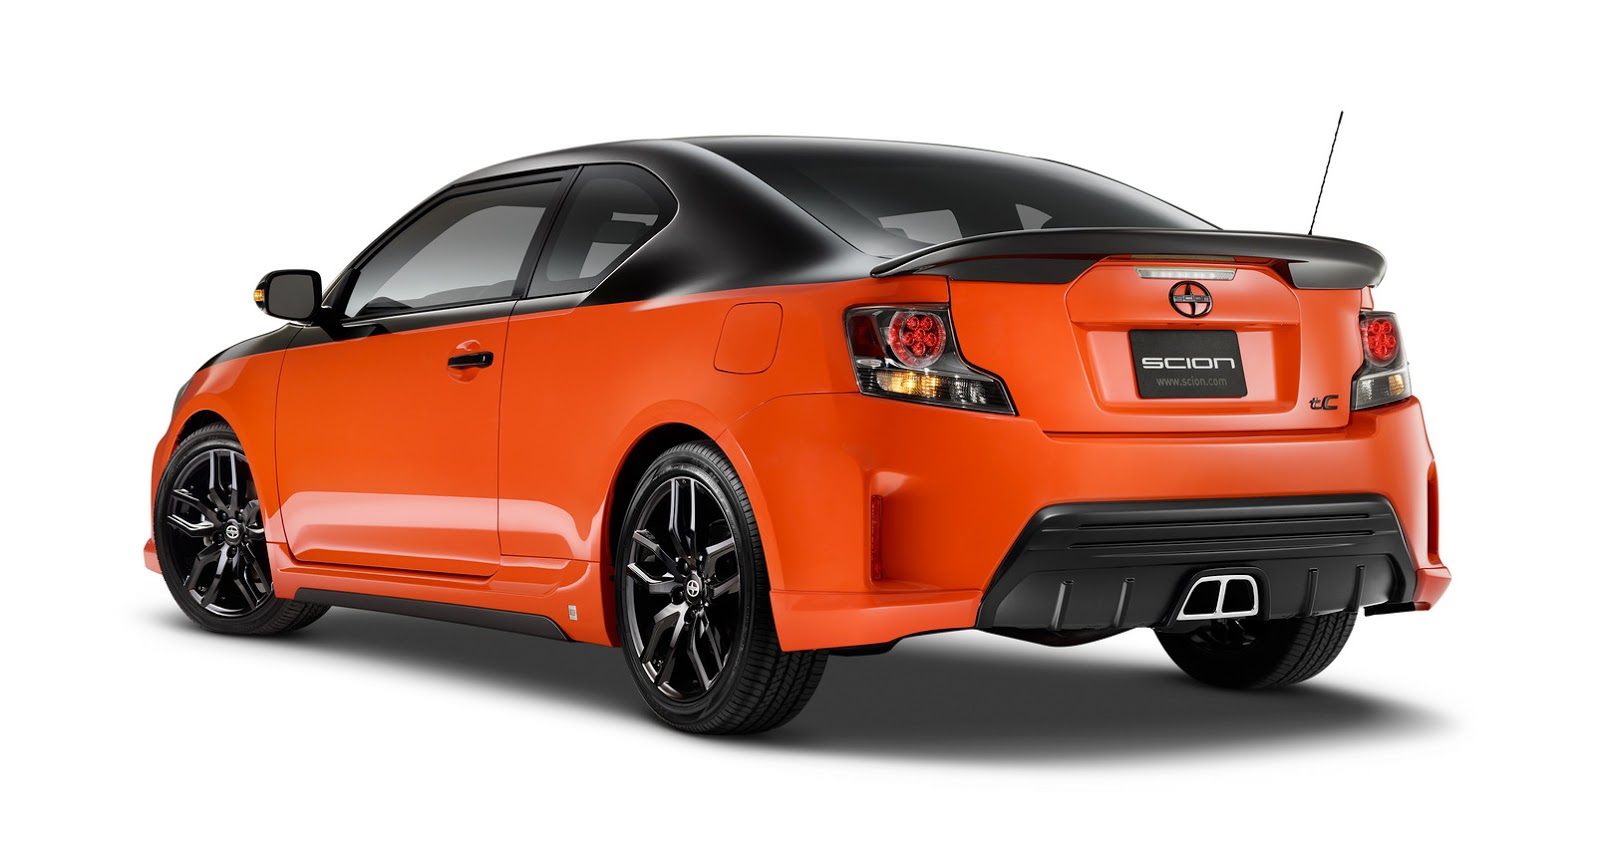 Scion Gives Tc Coupe A Two Tone Paint Job For Rs 9 0 Edition